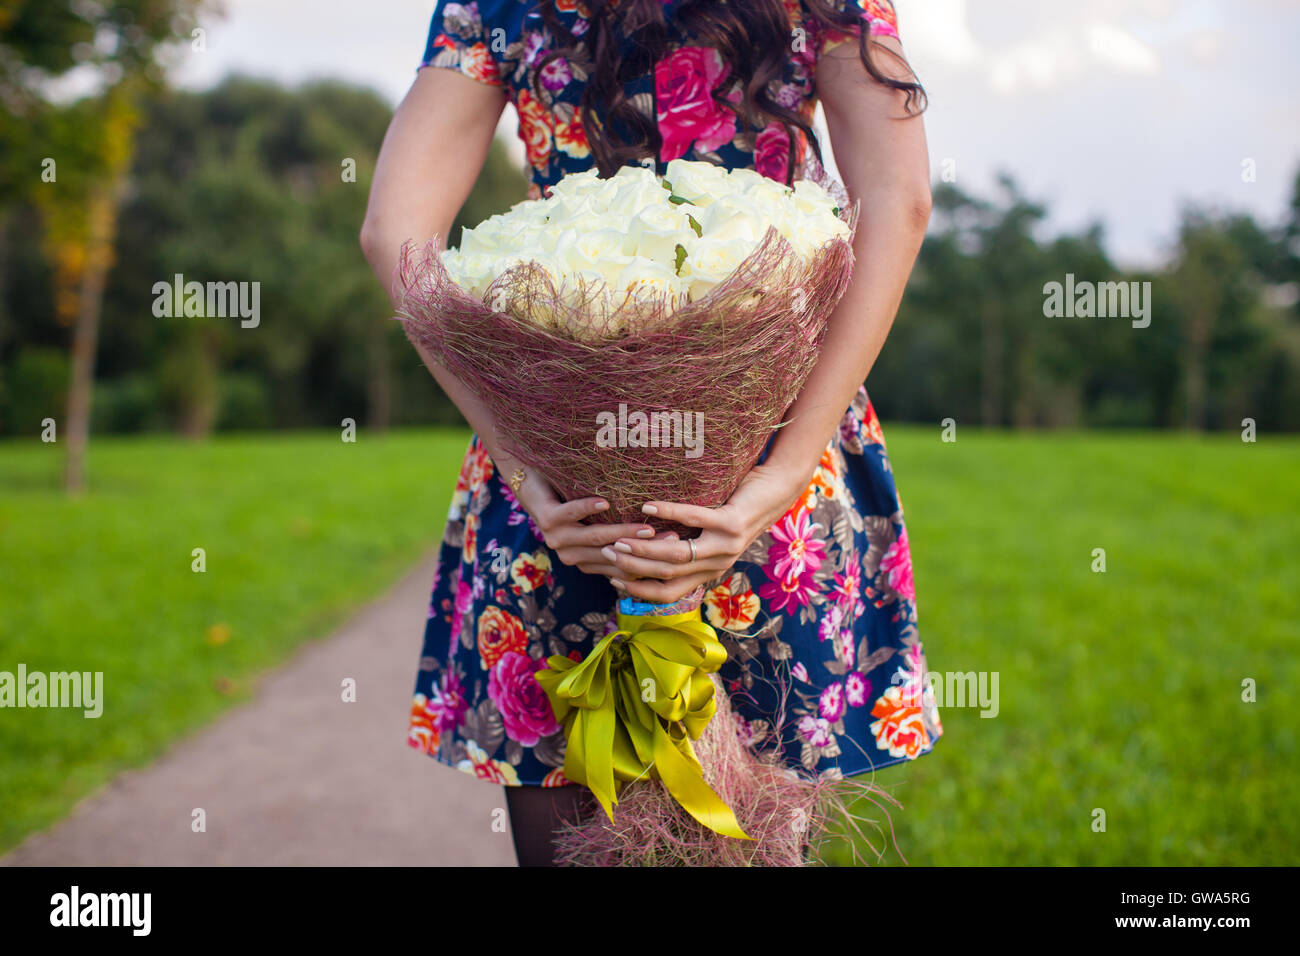 Incredibly beautiful large bouquet of white roses at the hands of a young girl in colored dress Stock Photo